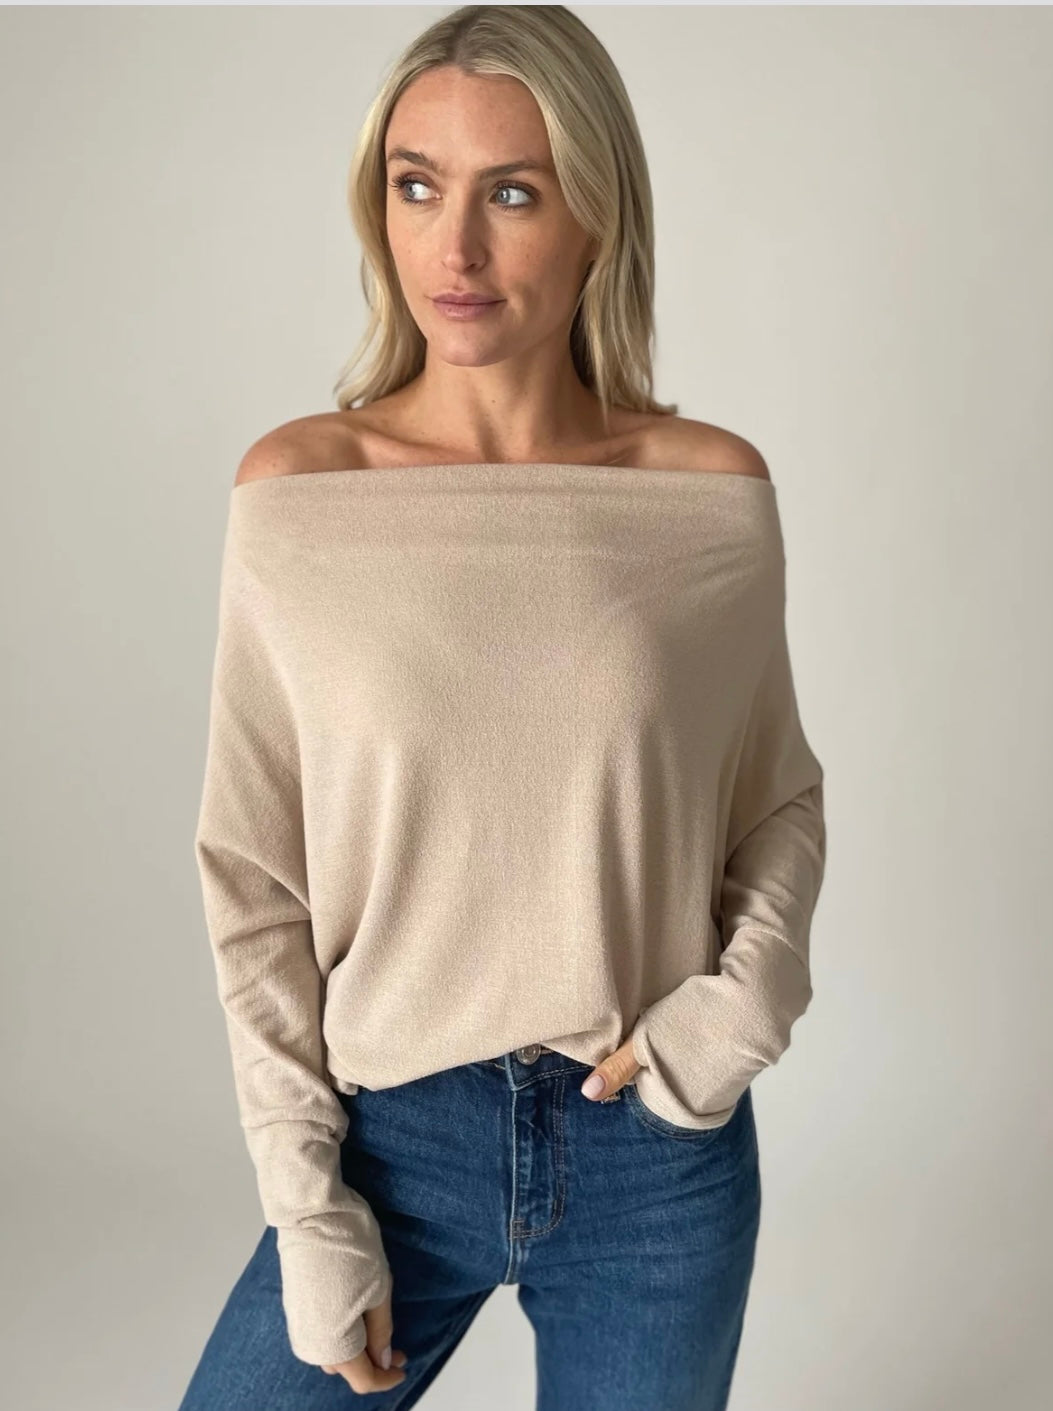 Six Fifty Clothing Company The Anywhere Top Taupe